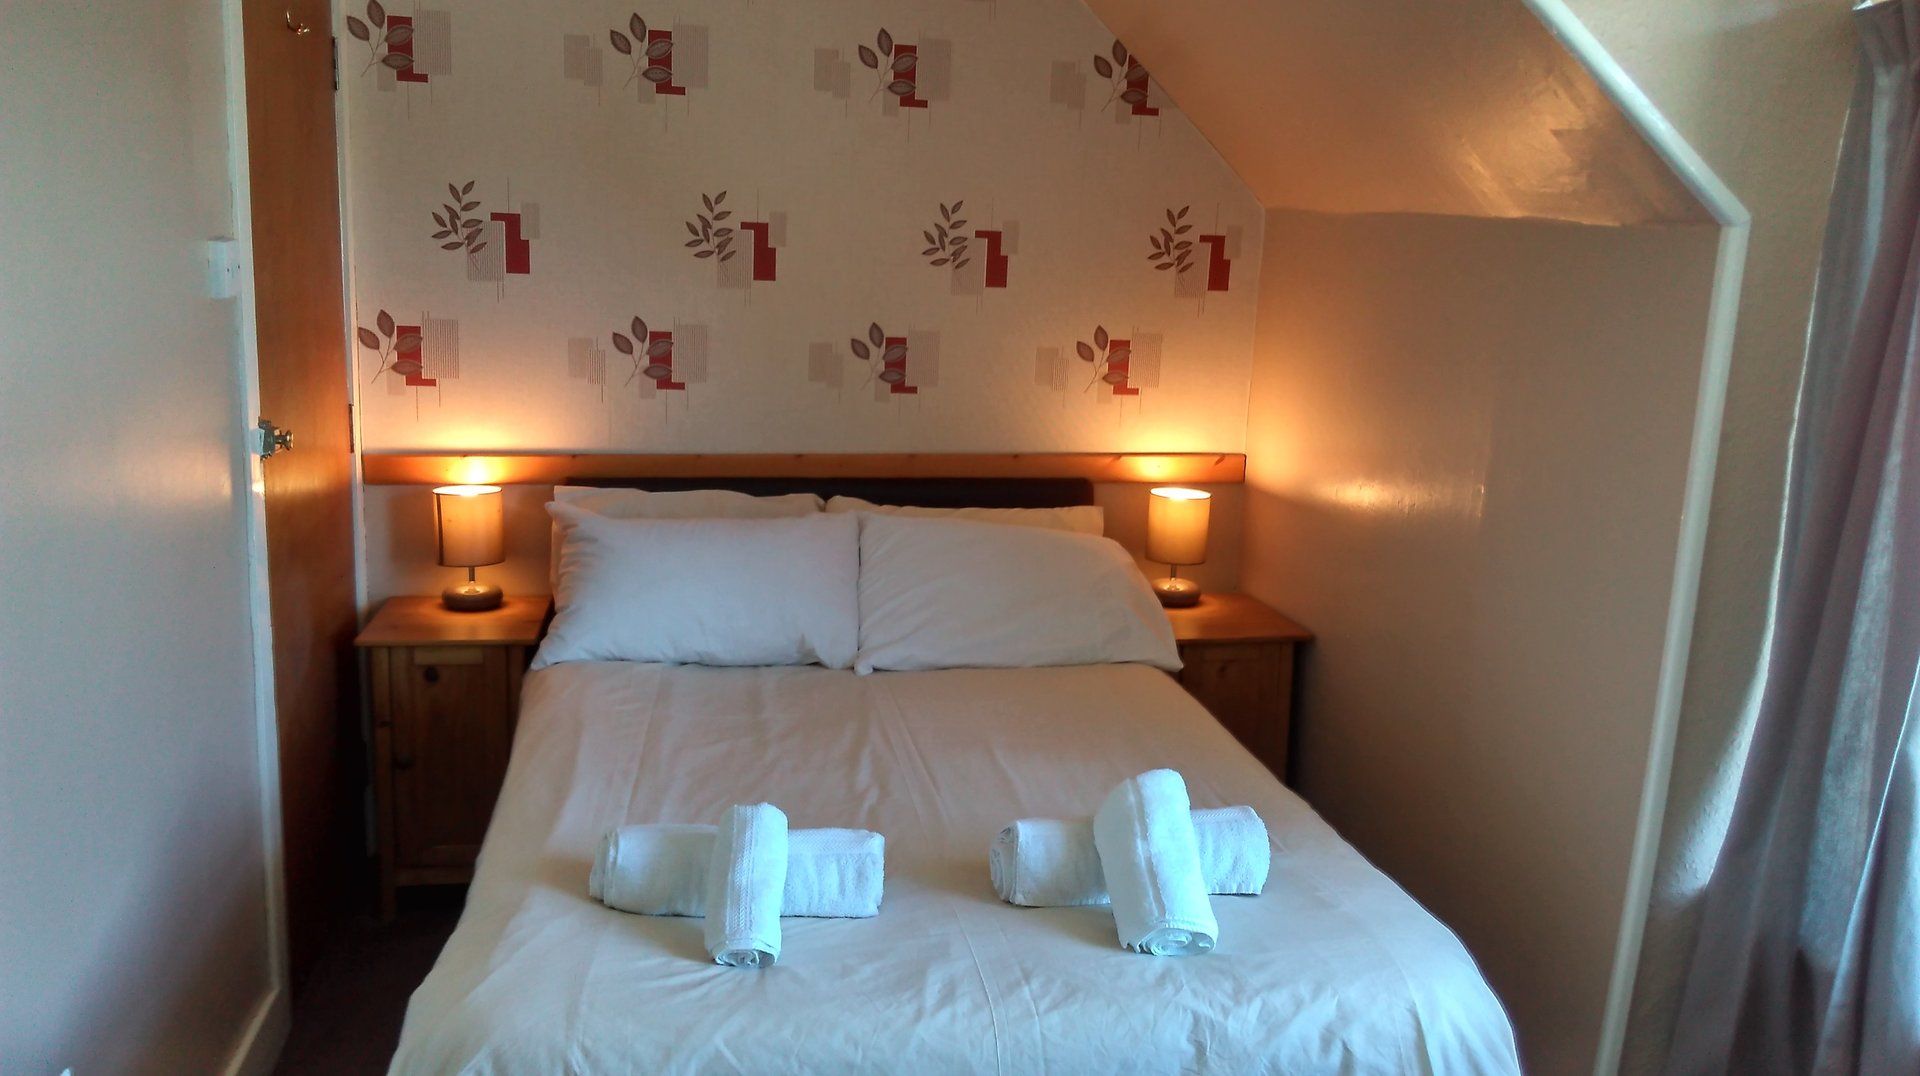 Our Rooms at the Glenavon, Tomintoul